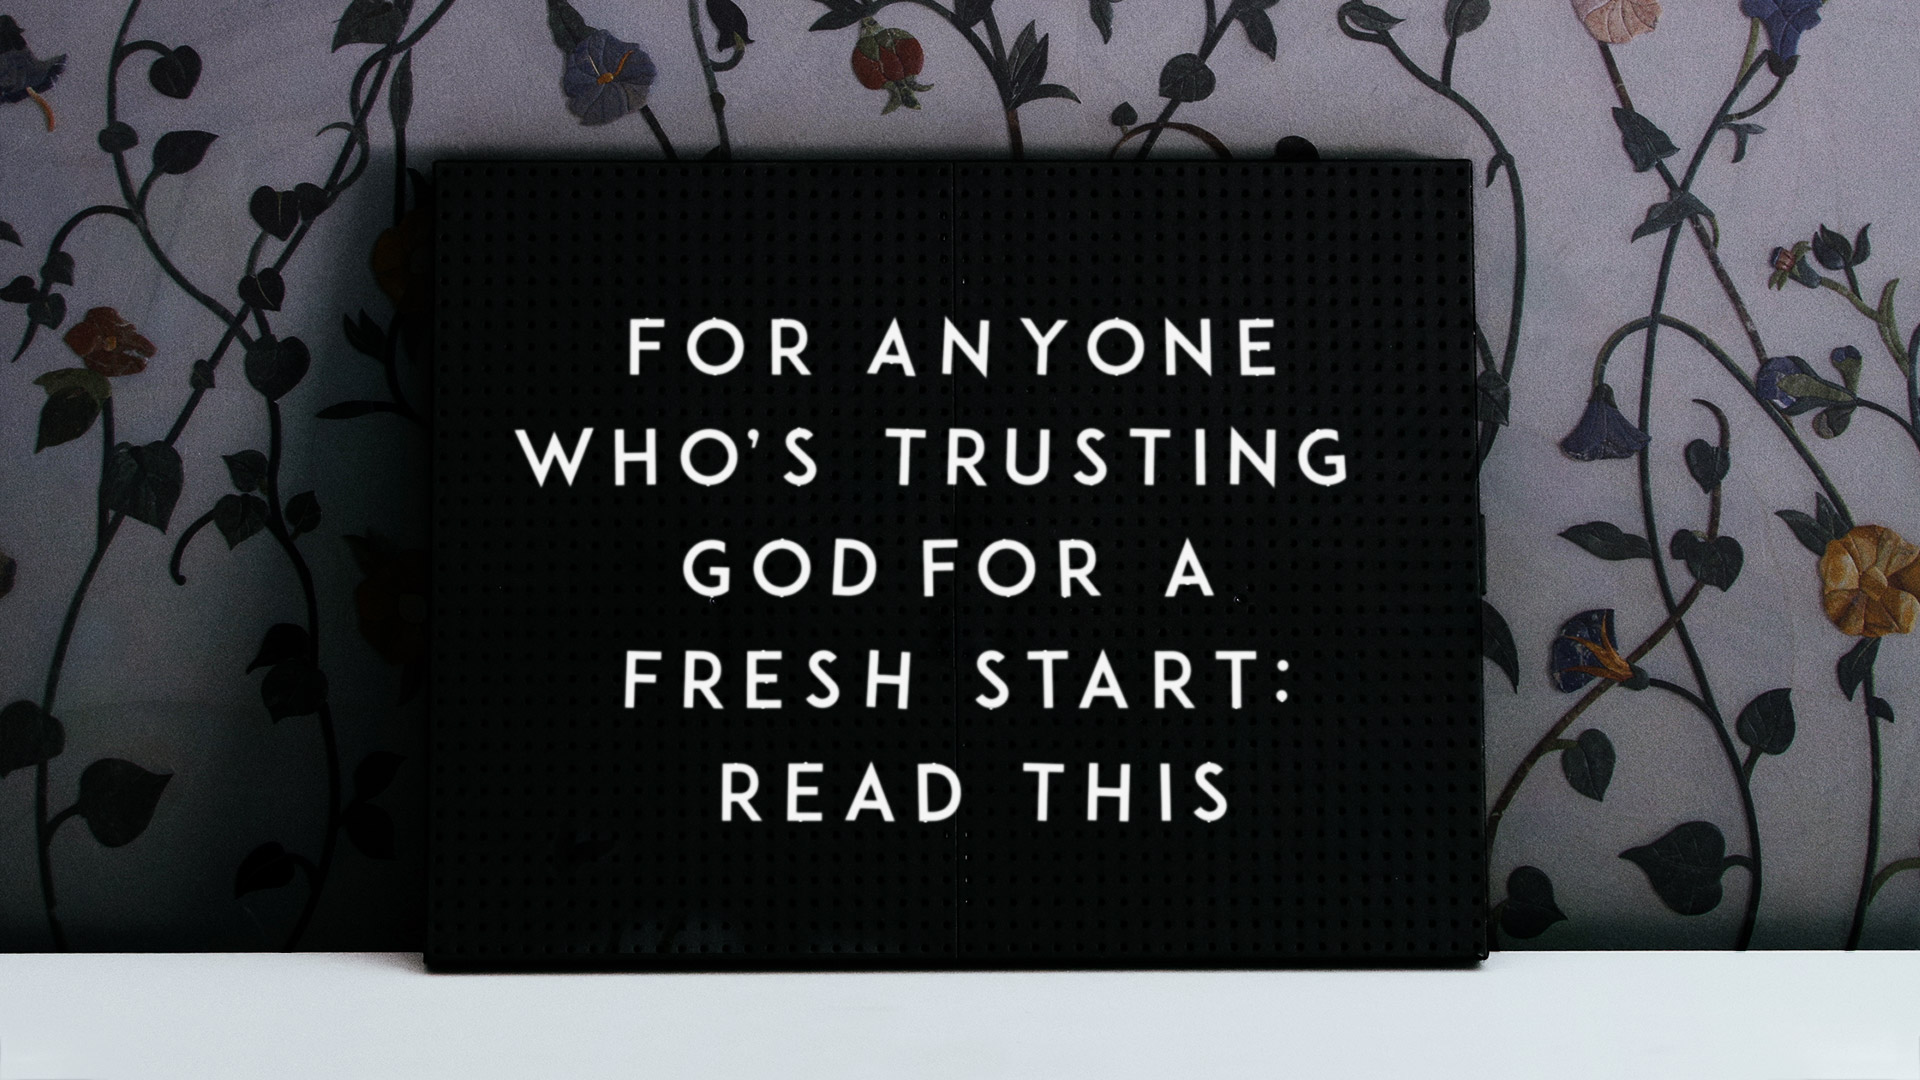 For anyone who’s trusting God for a fresh start: read this.